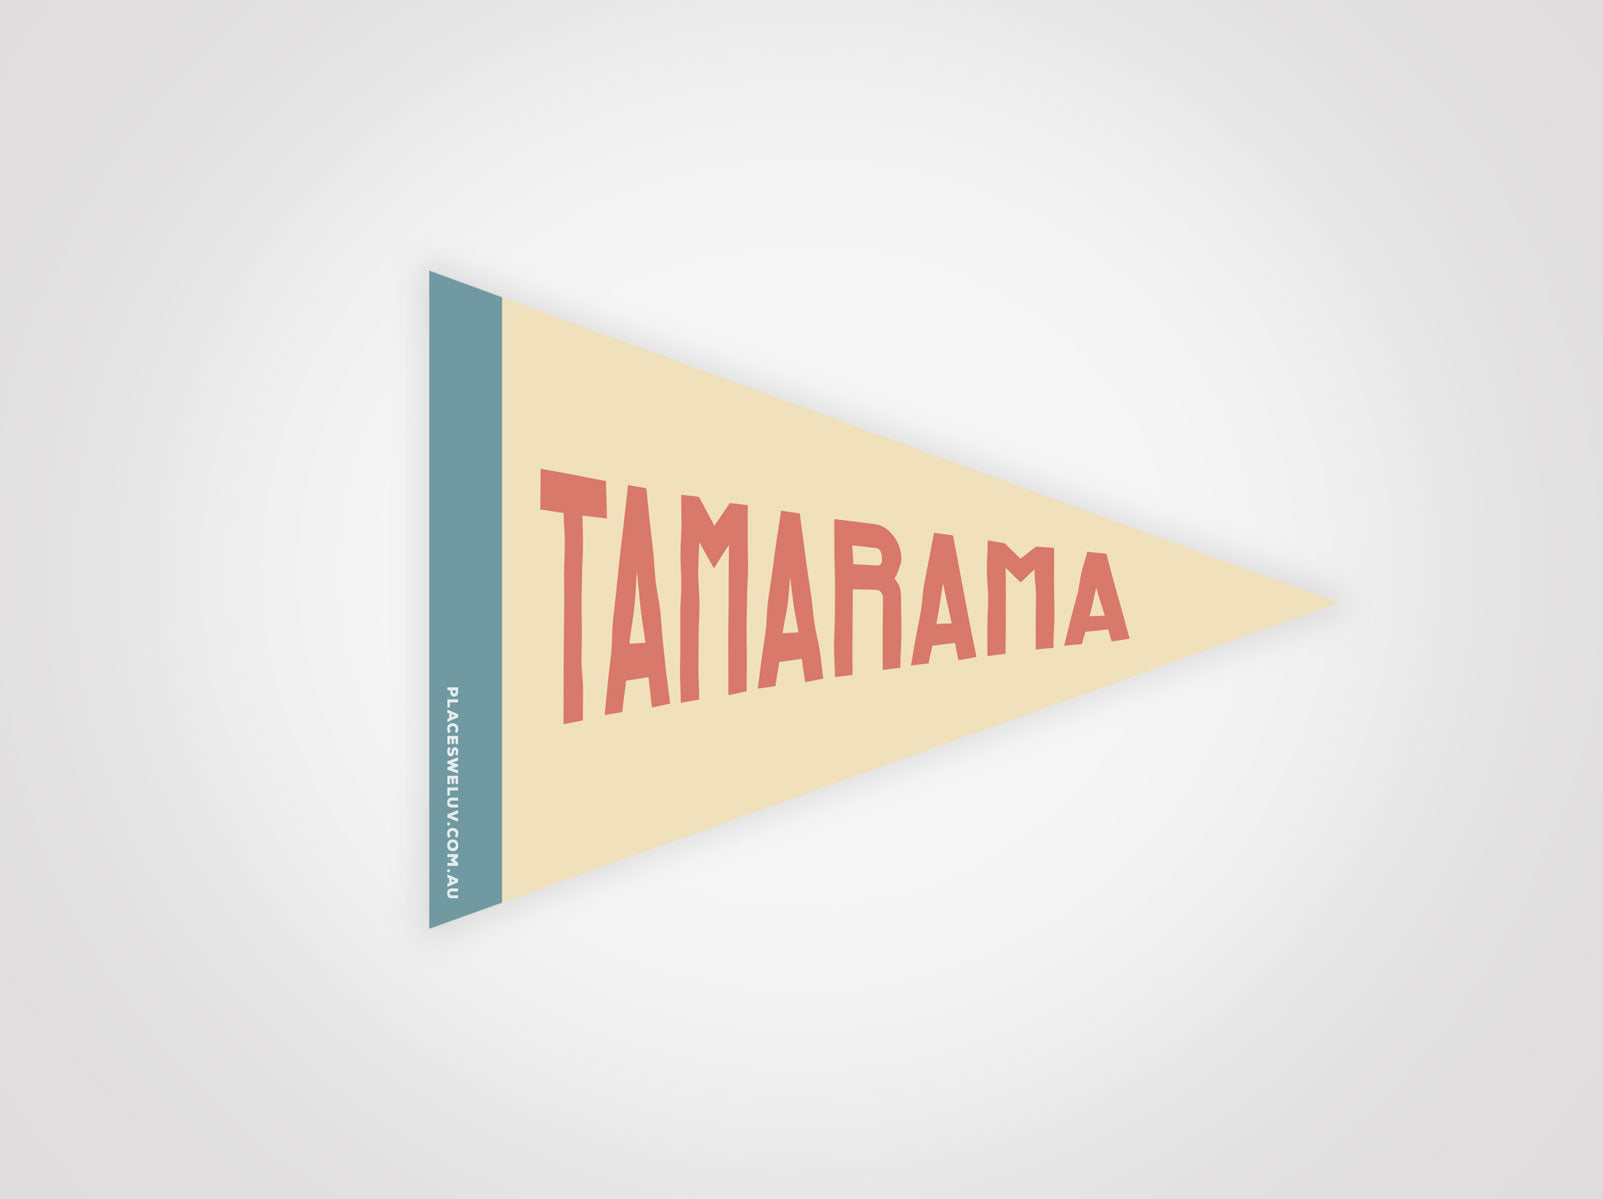 Tamarama vintage style travel flag decal by places we luv